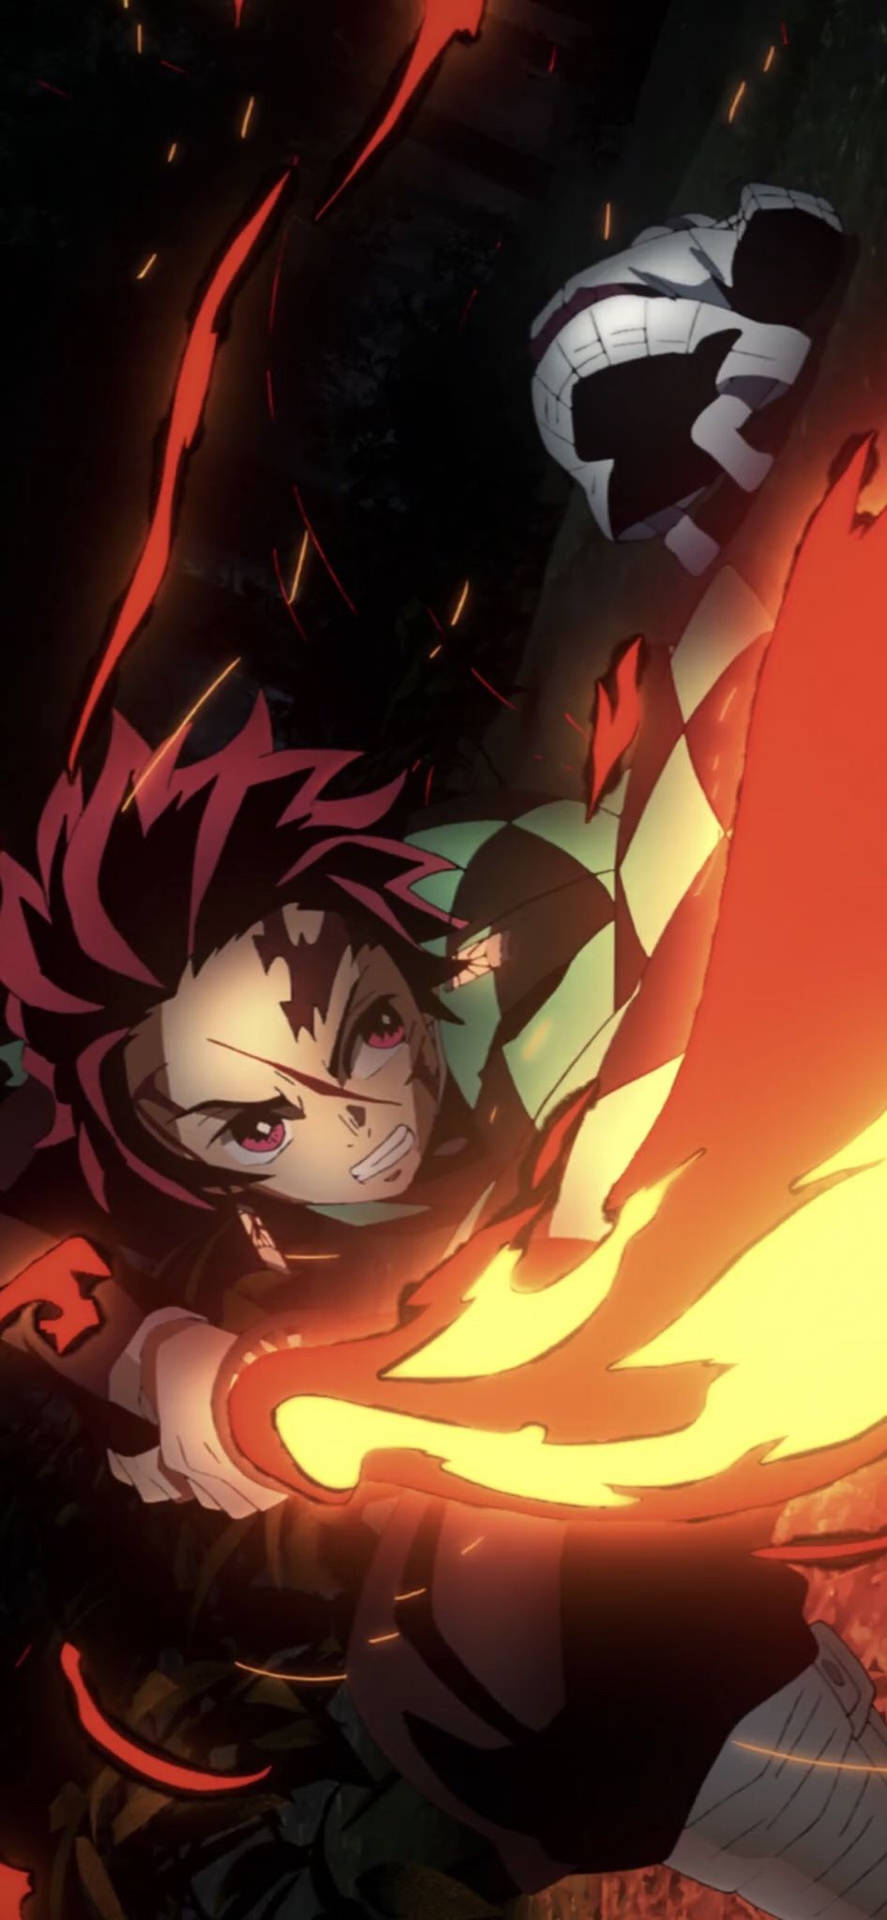 Demon Slayer wallpaper of  Tanjiro attacking with fire breathing technique with his sword. 